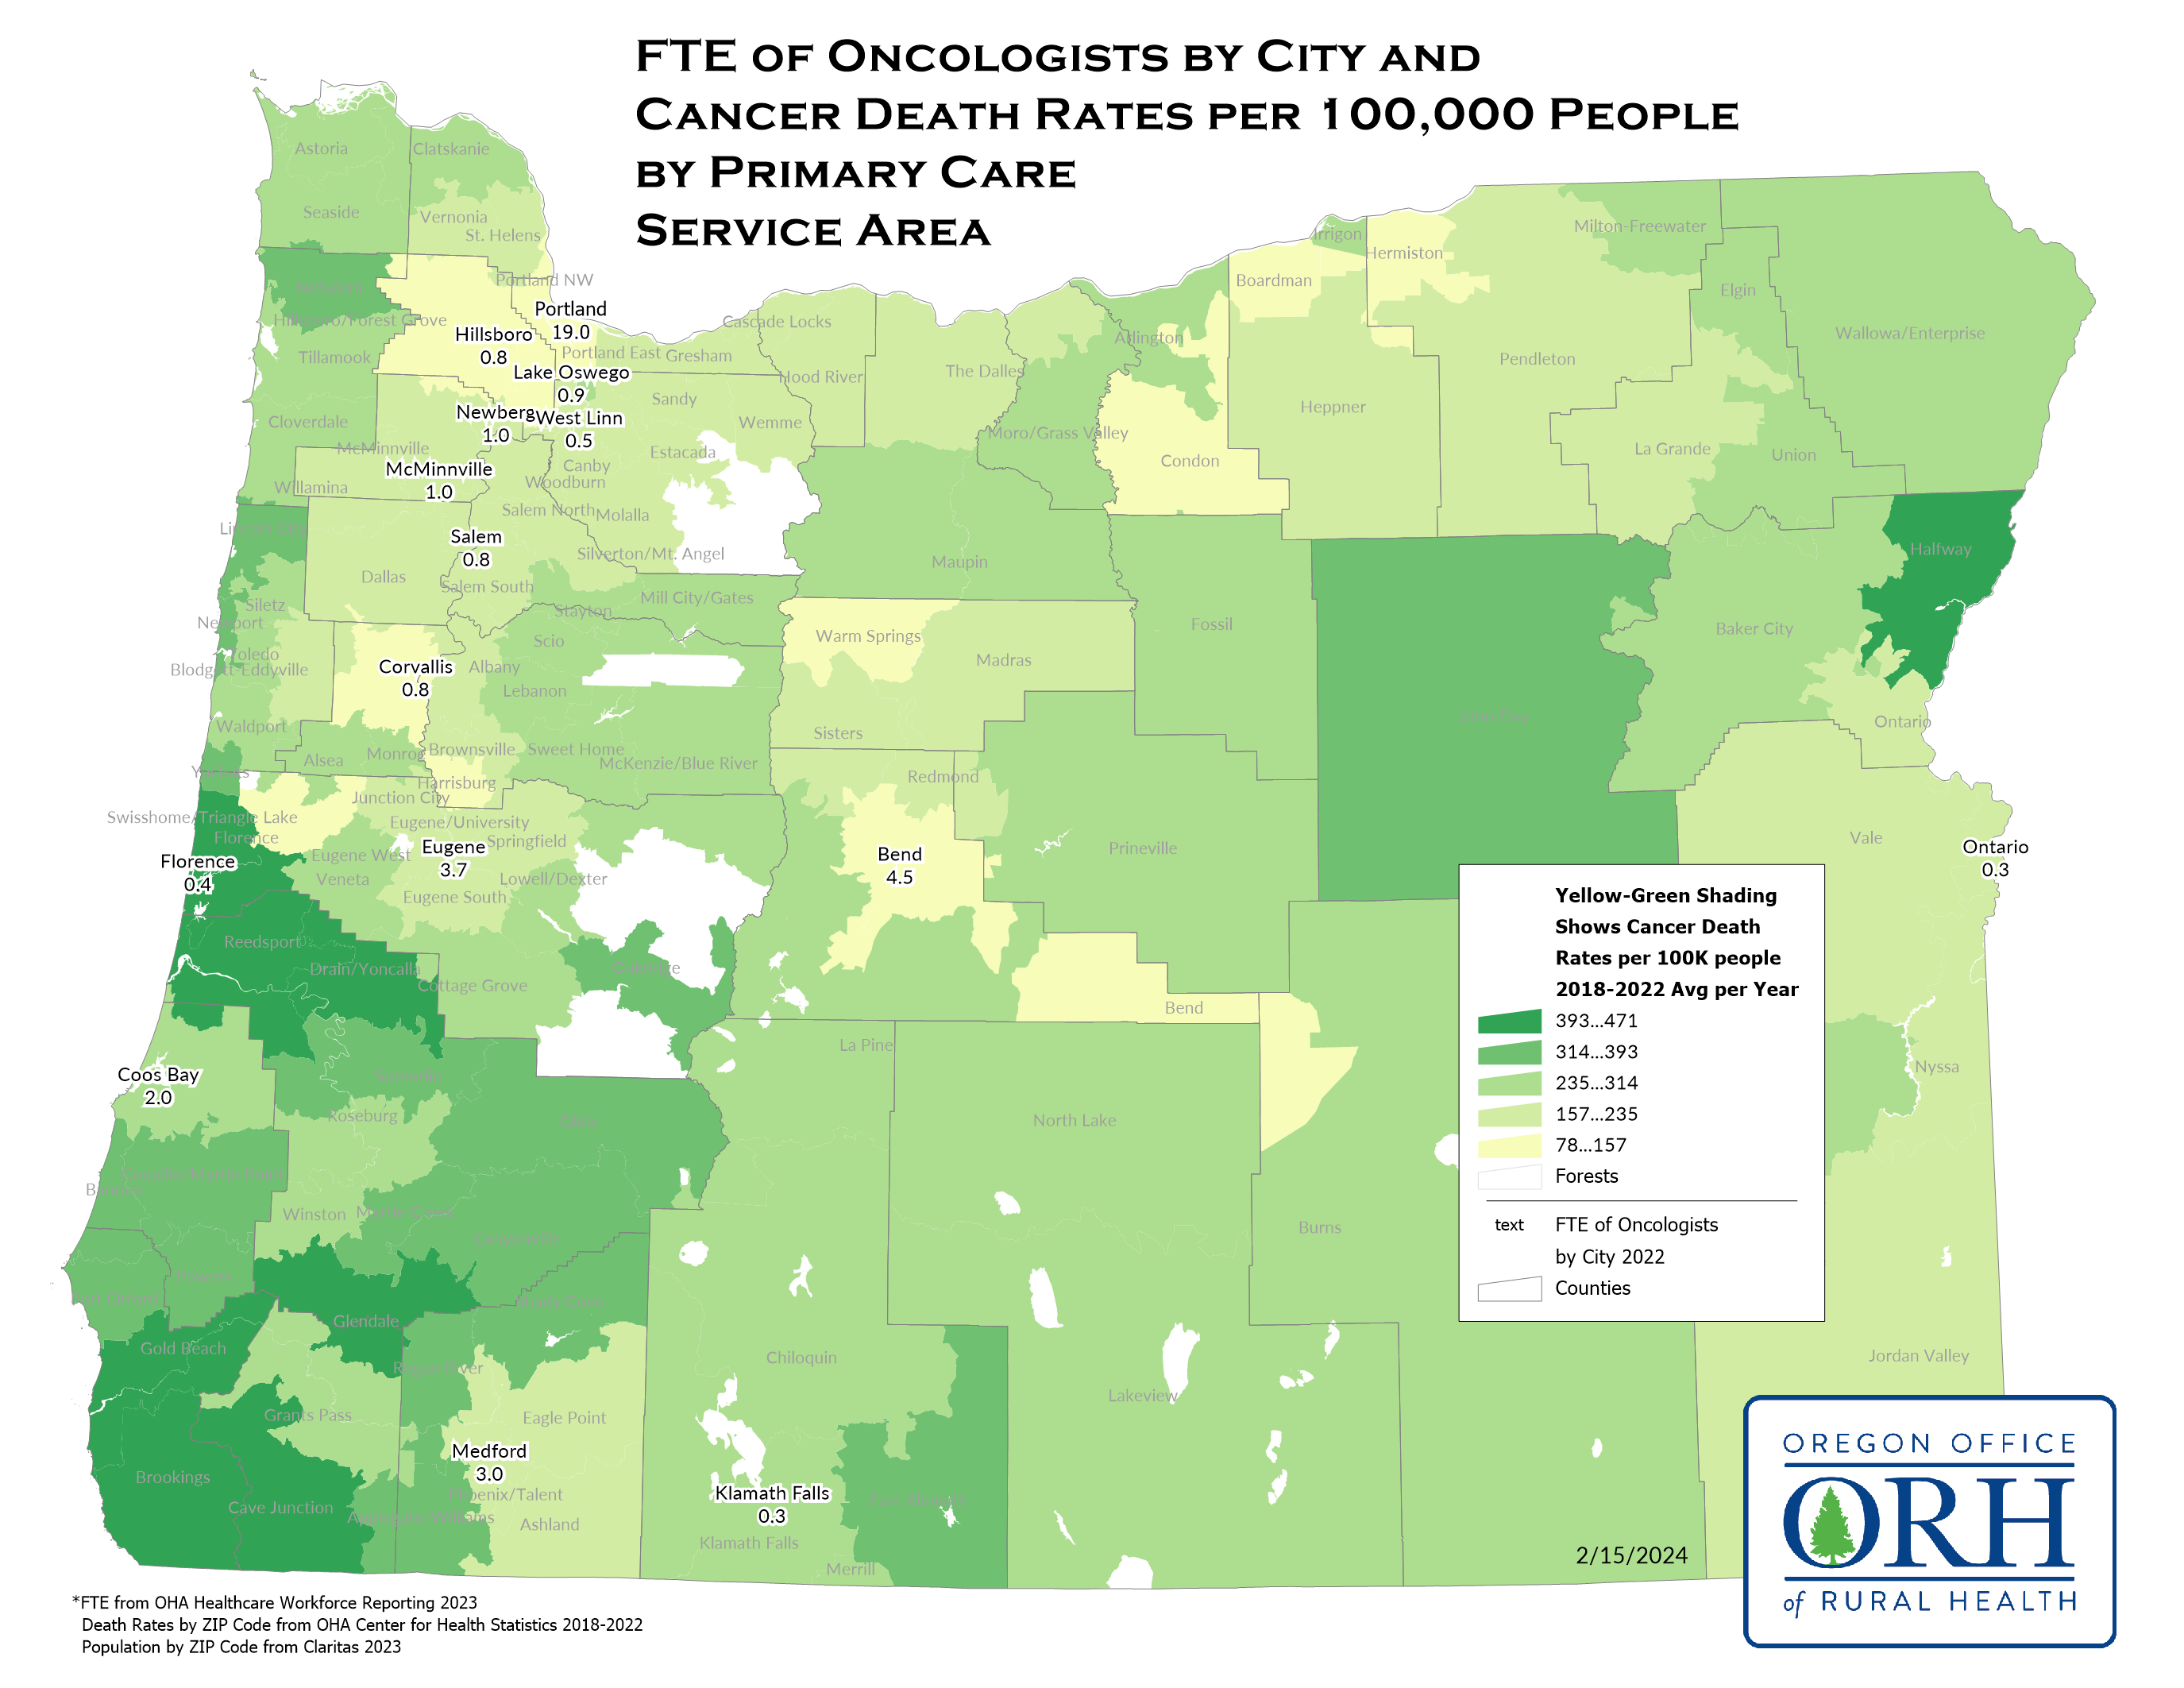 FTE of Oncologists by City and Cancer Death Rates per 100,000 by Service Area